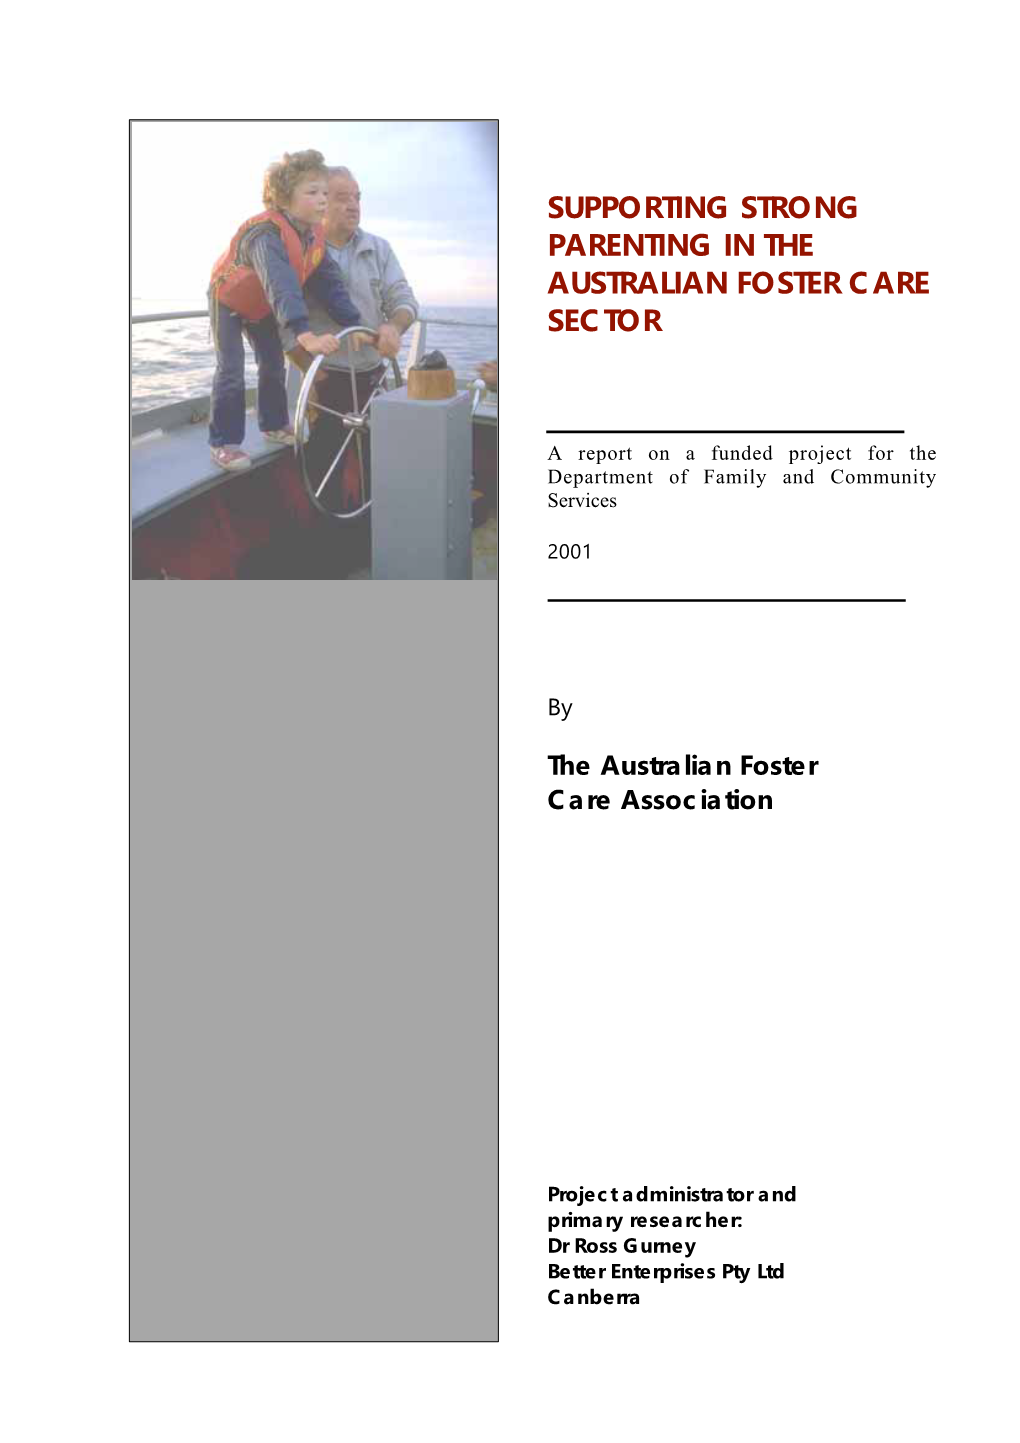 Supporting Strong Parenting in the Australian Foster Care Sector